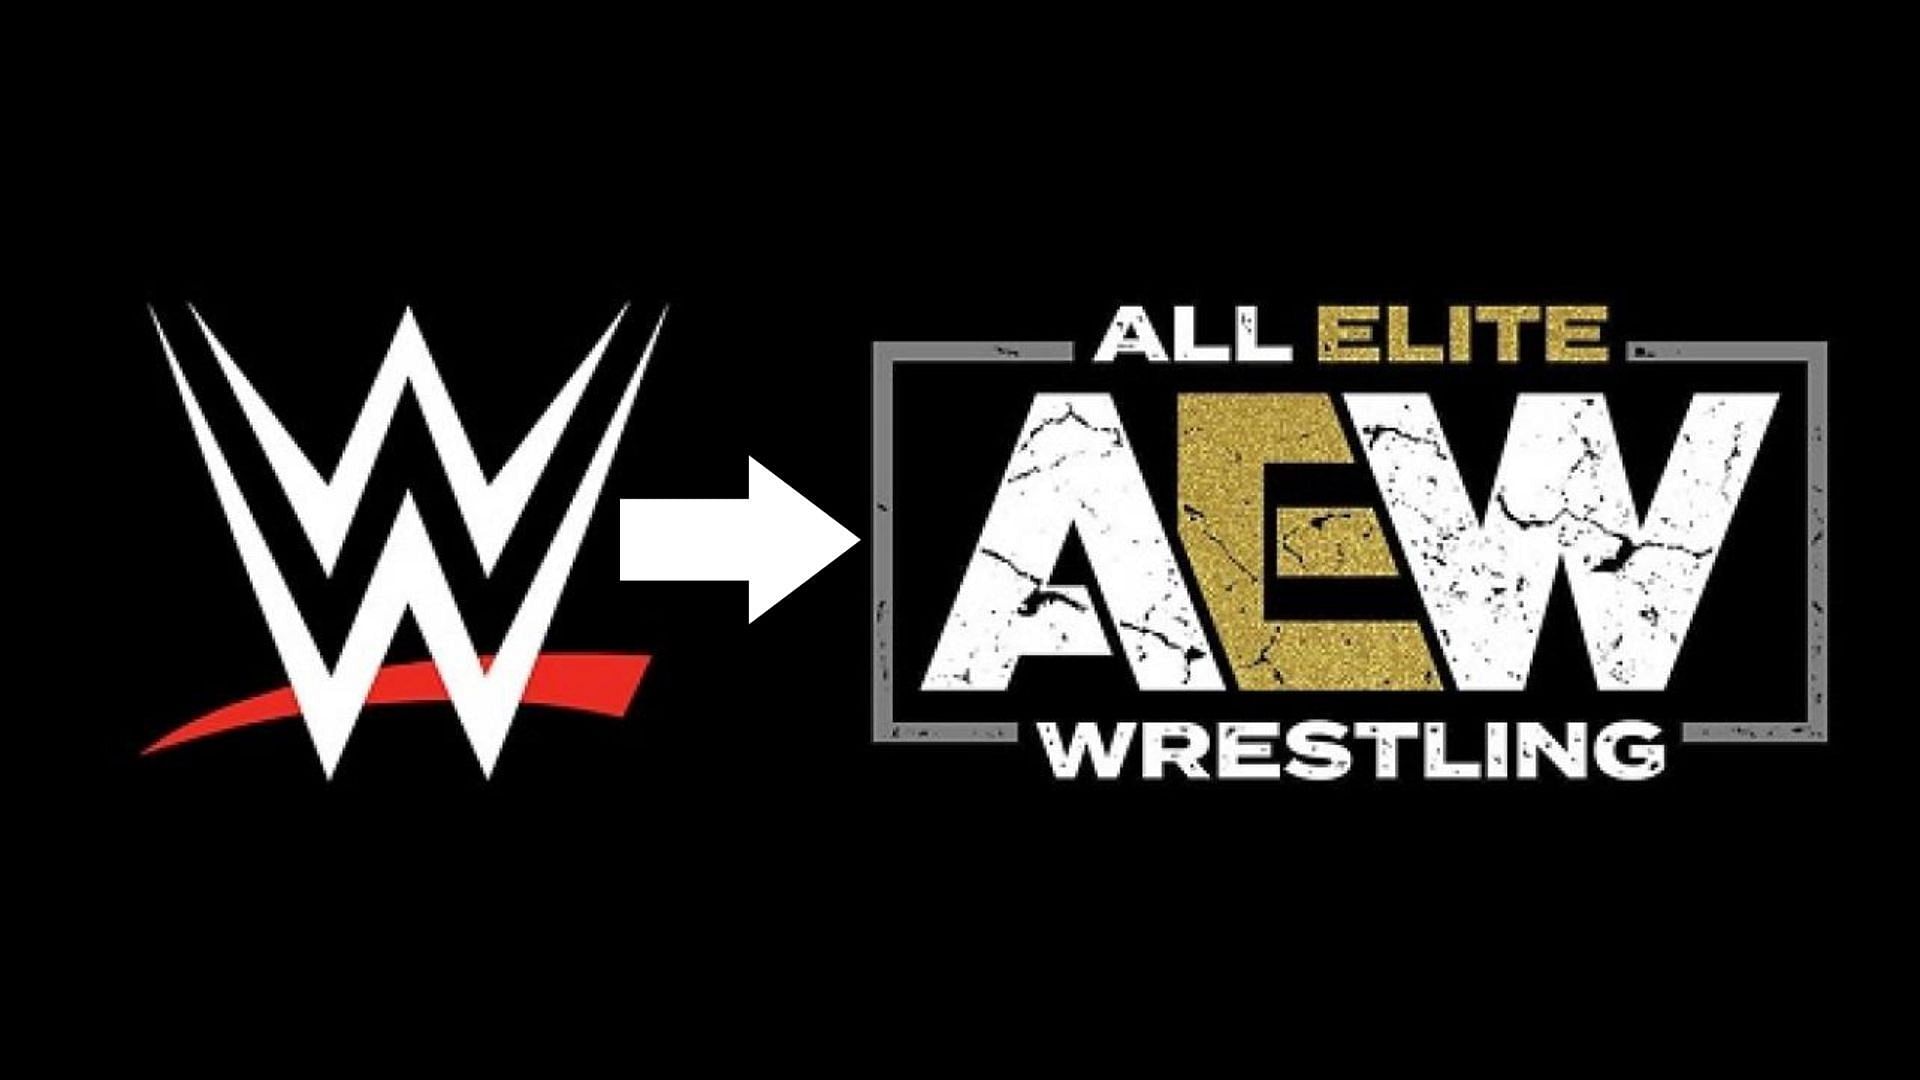 Many former WWE stars have gone to AEW